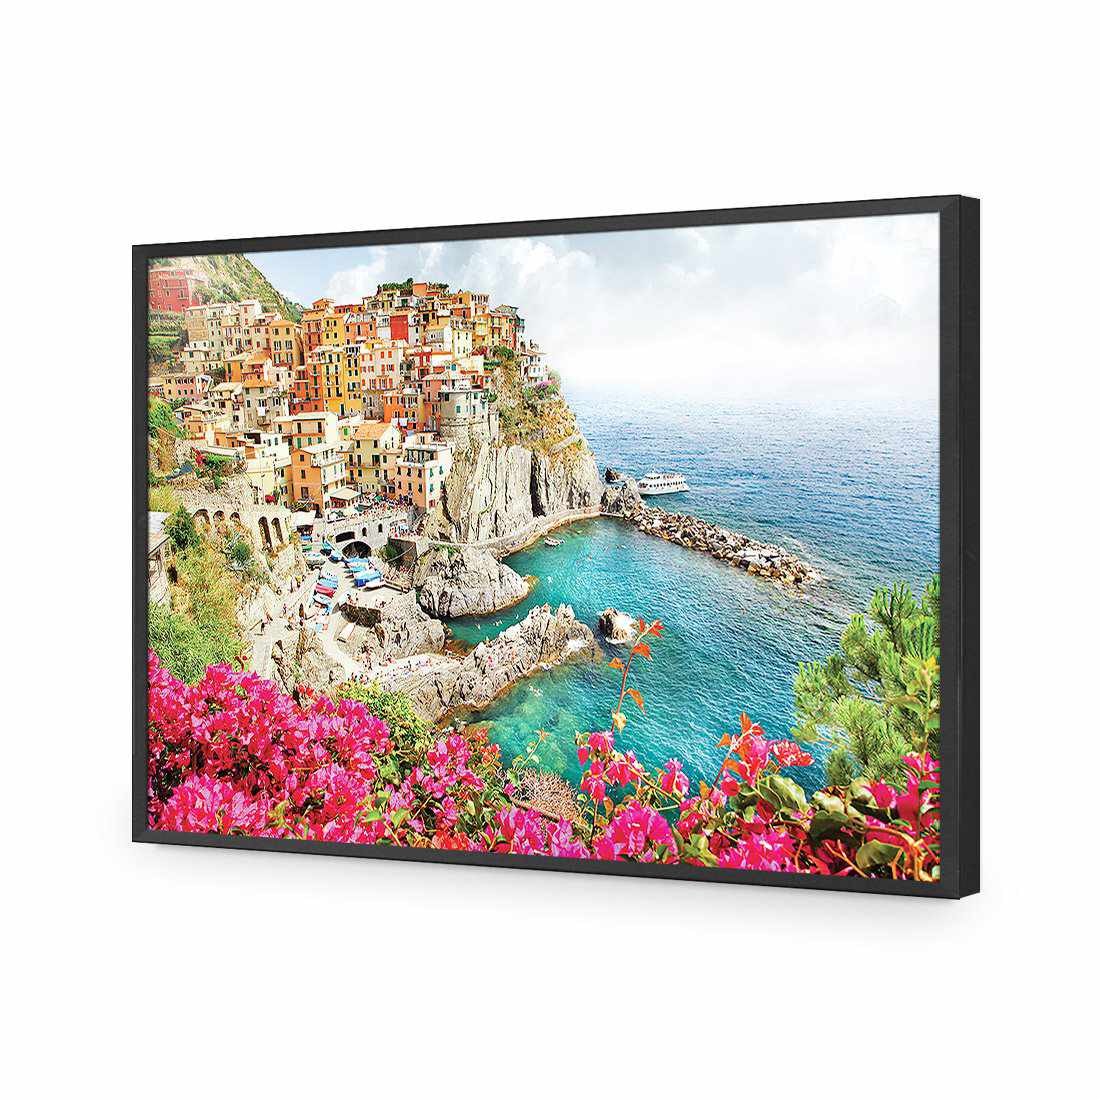 Cinque Terre in Italy-Acrylic-Wall Art Design-Without Border-Acrylic - Black Frame-45x30cm-Wall Art Designs